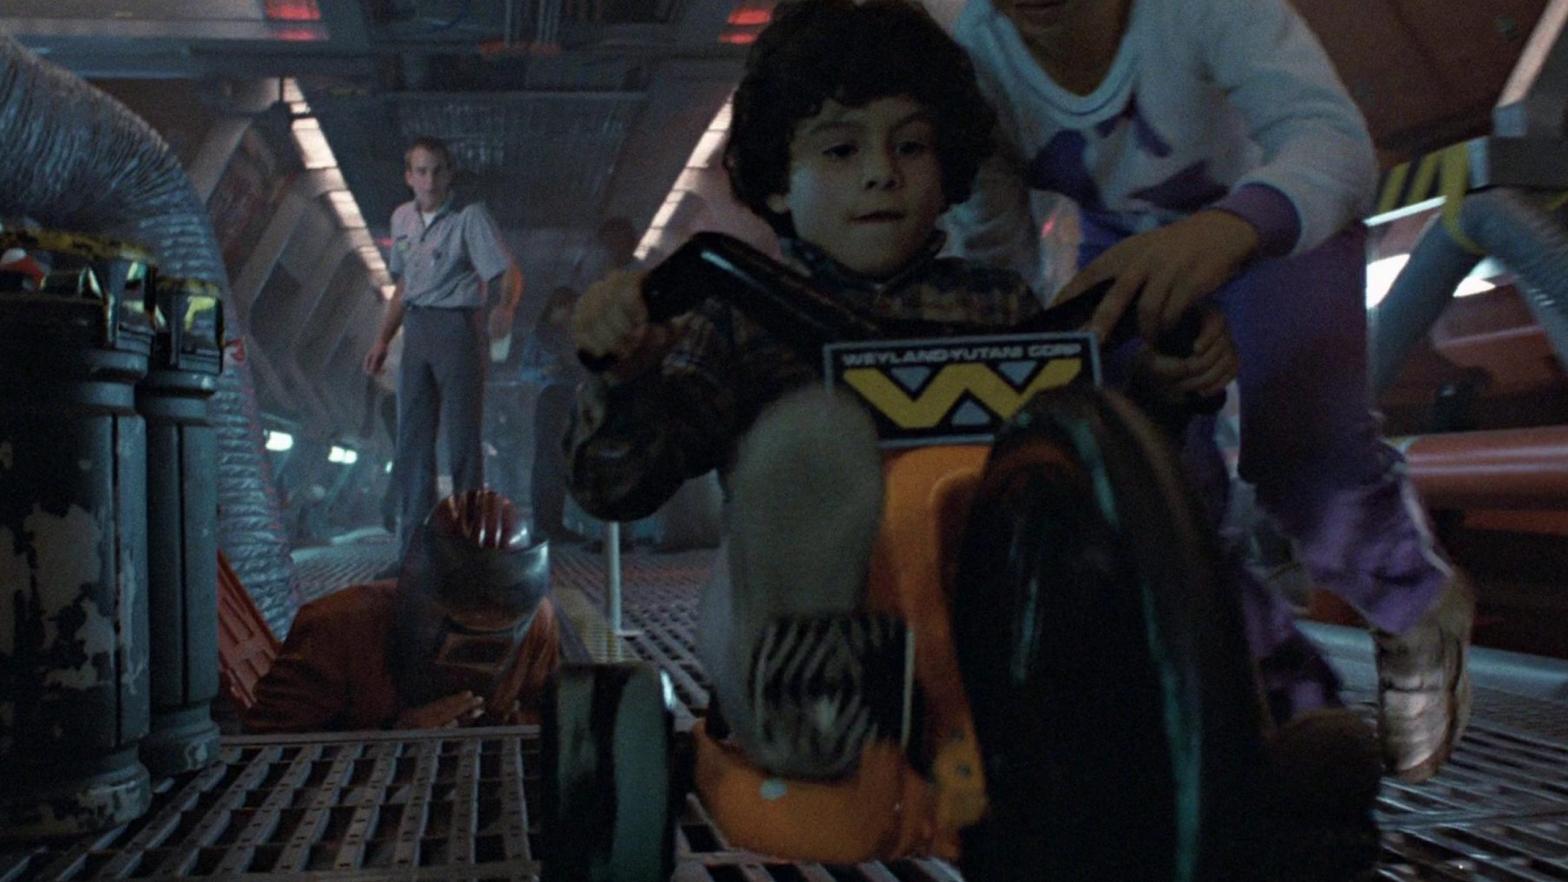 A kid rides a Weyland-Yutani-branded Big Wheel in this deleted scene from Aliens. (Screenshot: 20th Century)